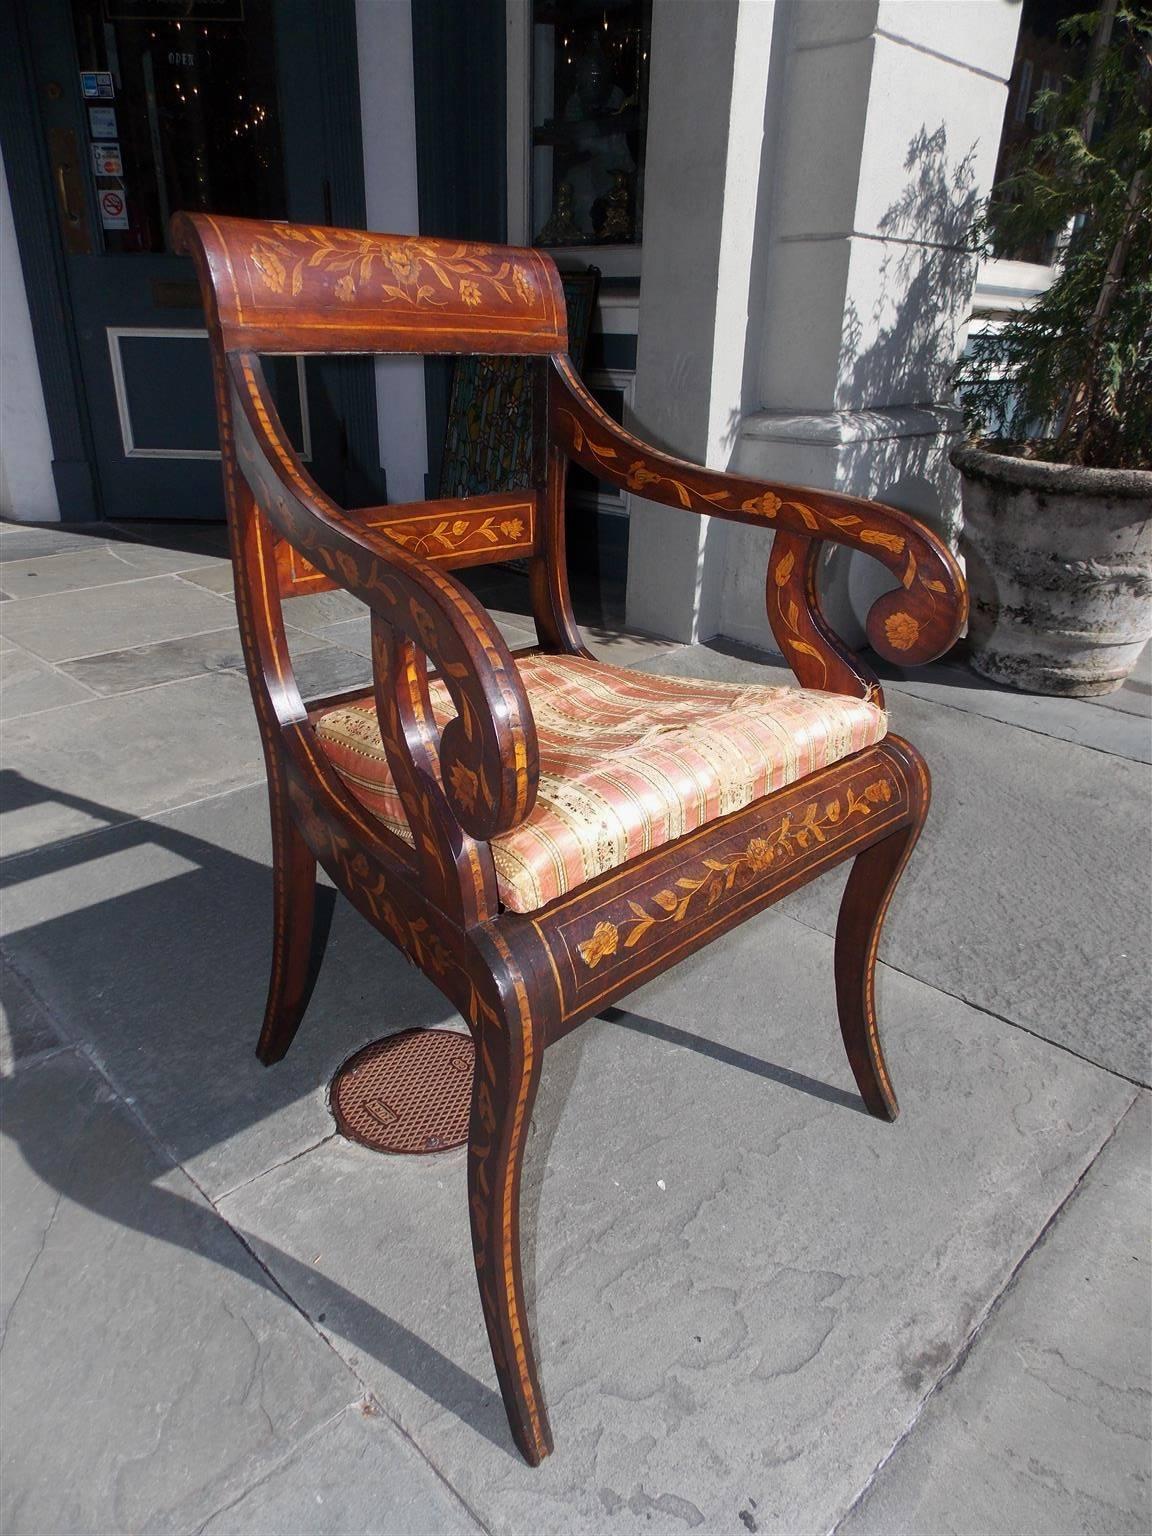 Italian walnut marquetry armchair with decorative floral tulip inlays, flanking scrolled arms, upholstered muslin seat, and terminating on saber legs. Seat is upholstered in white muslin, Early 19th Century.